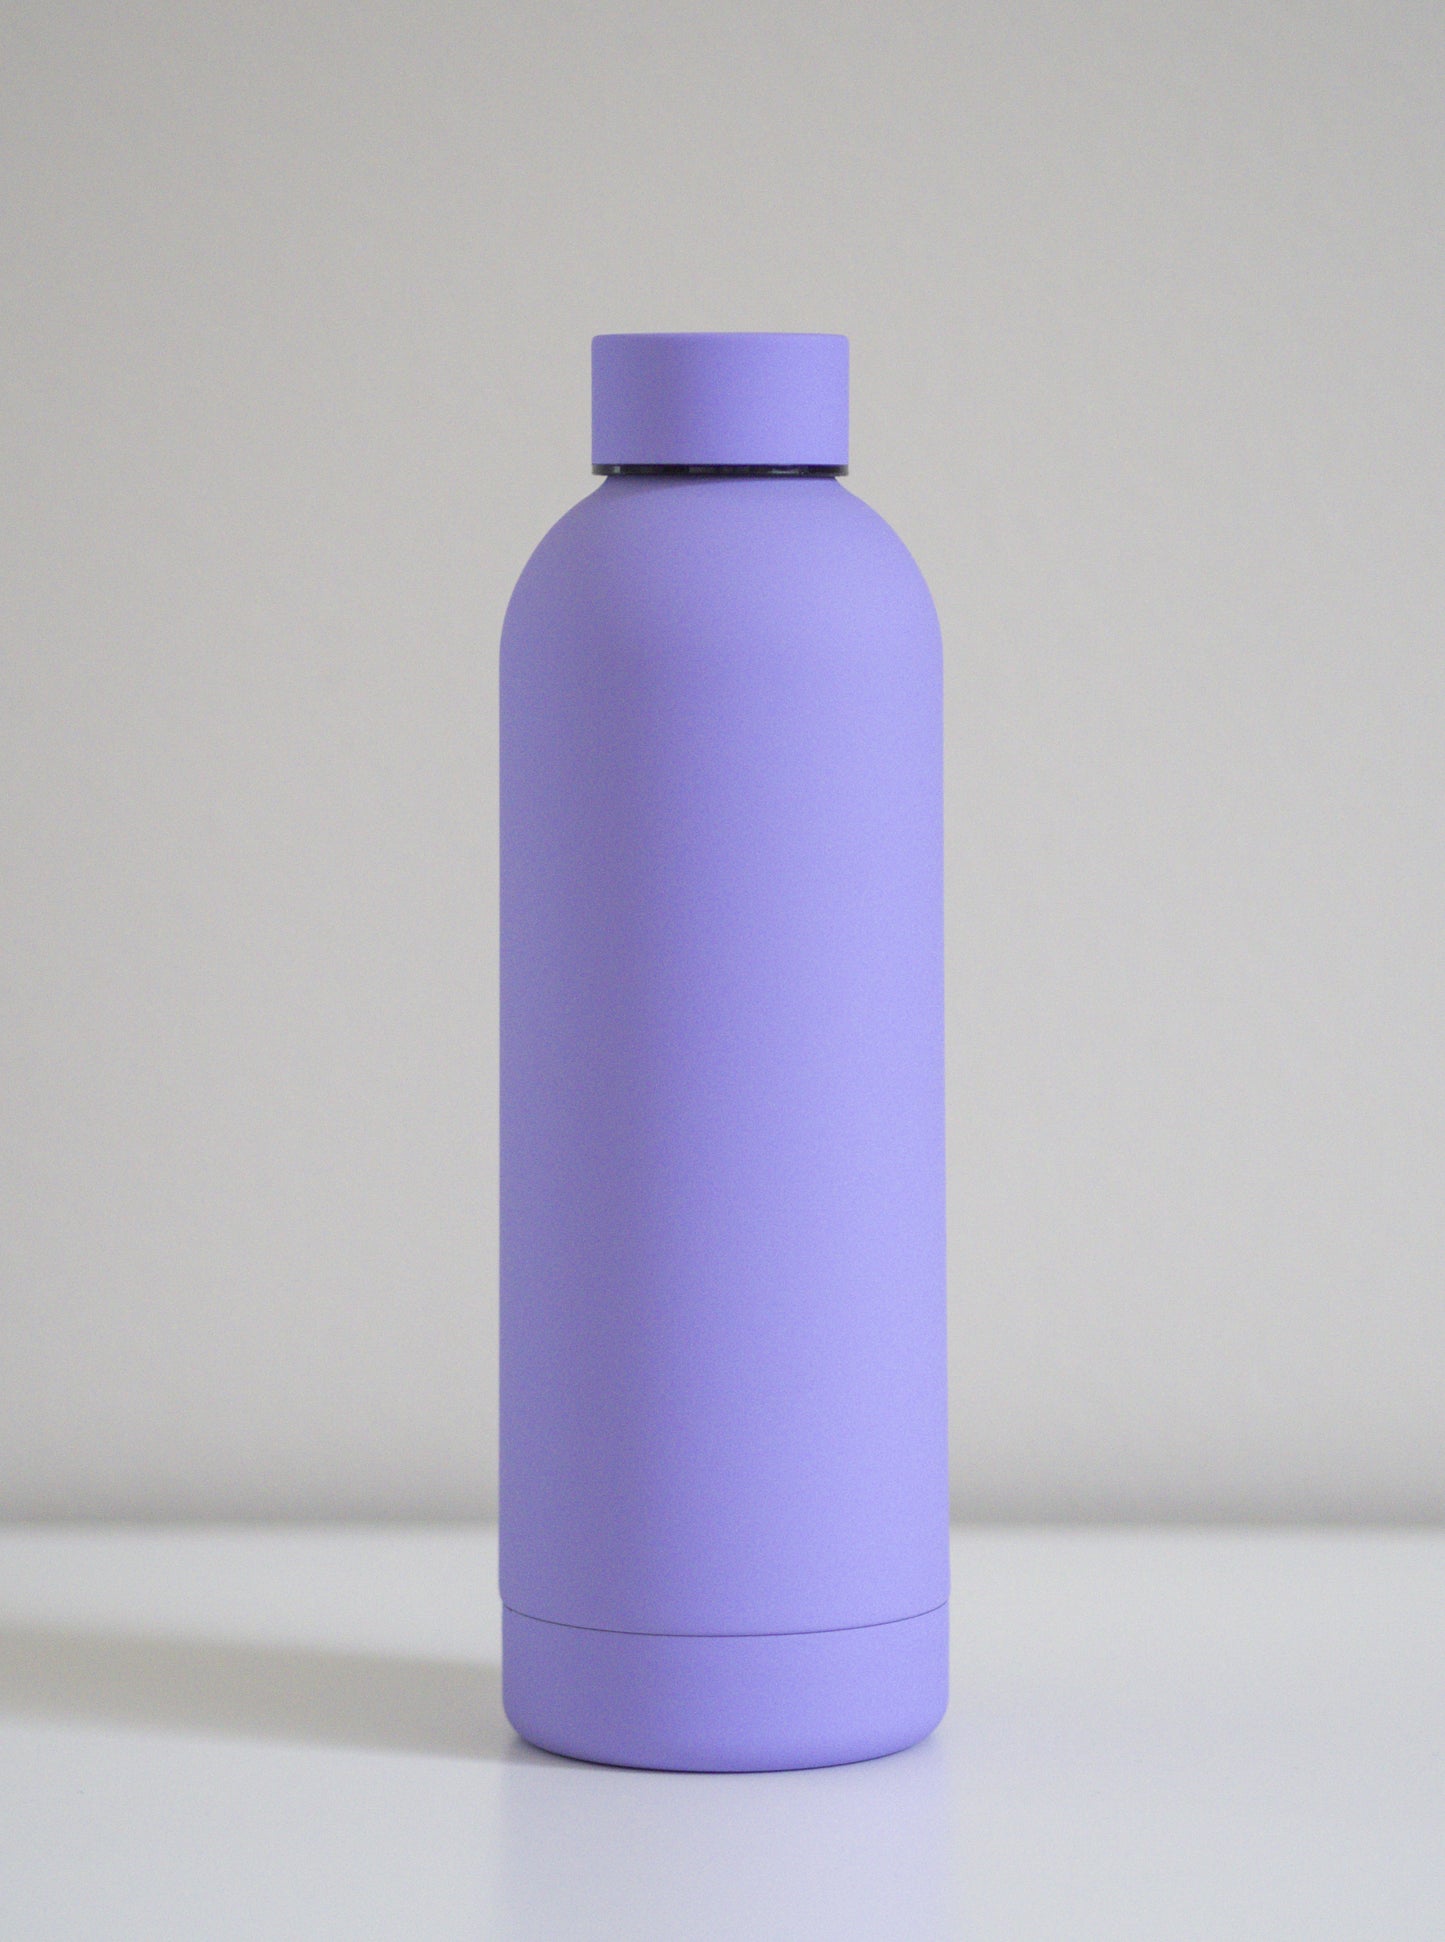 Plain Stainless Steel Pastel Lilac Water Bottle